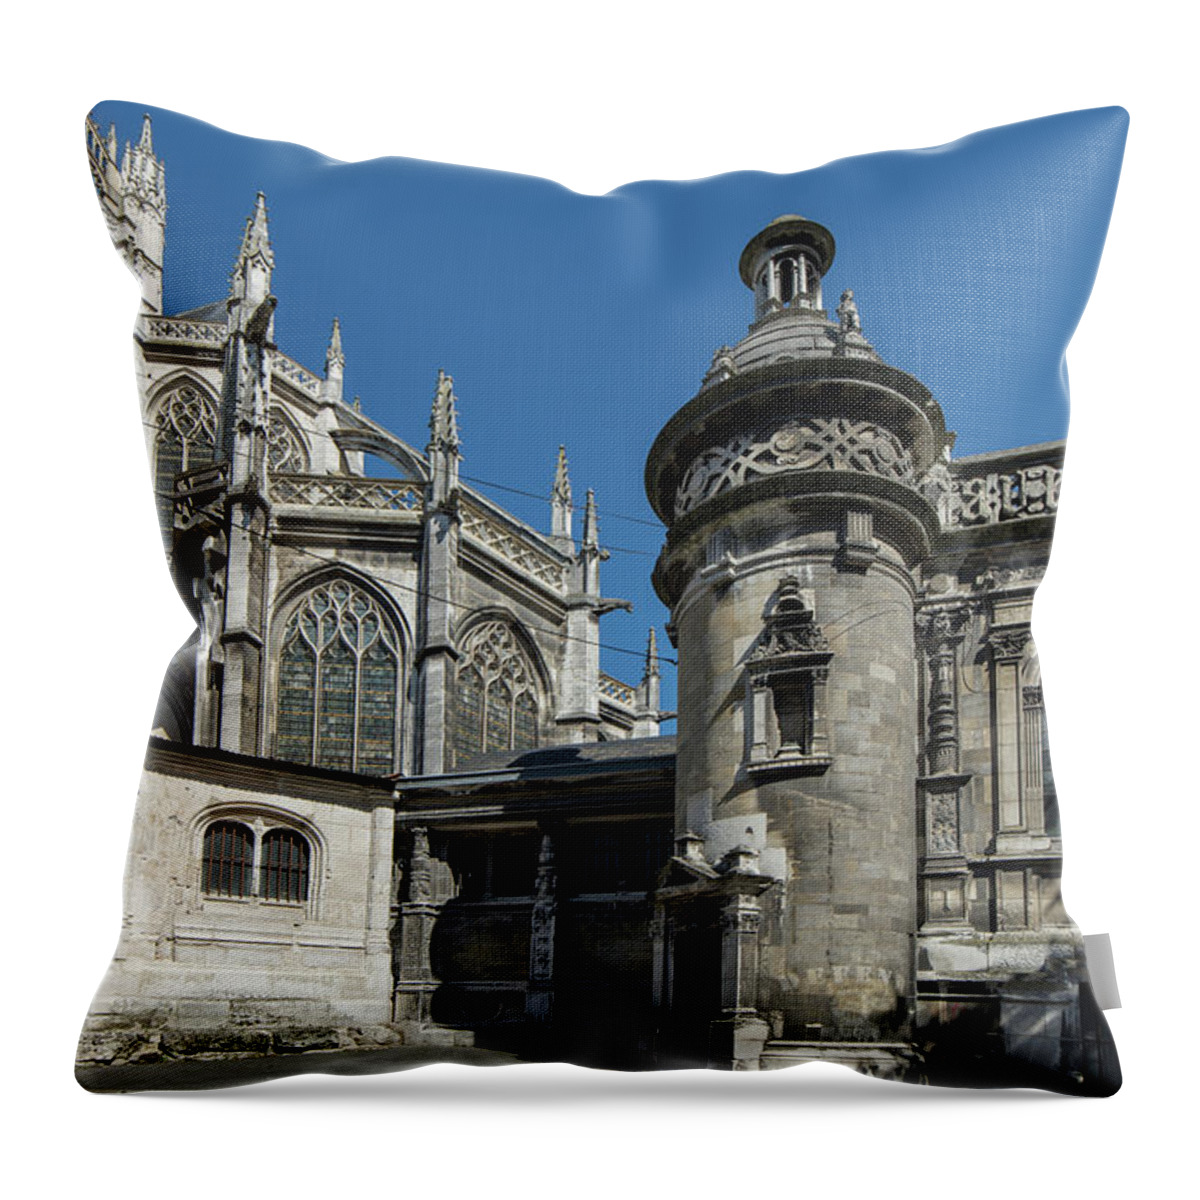 Europe Throw Pillow featuring the digital art Monastery of Saint Ouen in Rouen France by Carol Ailles